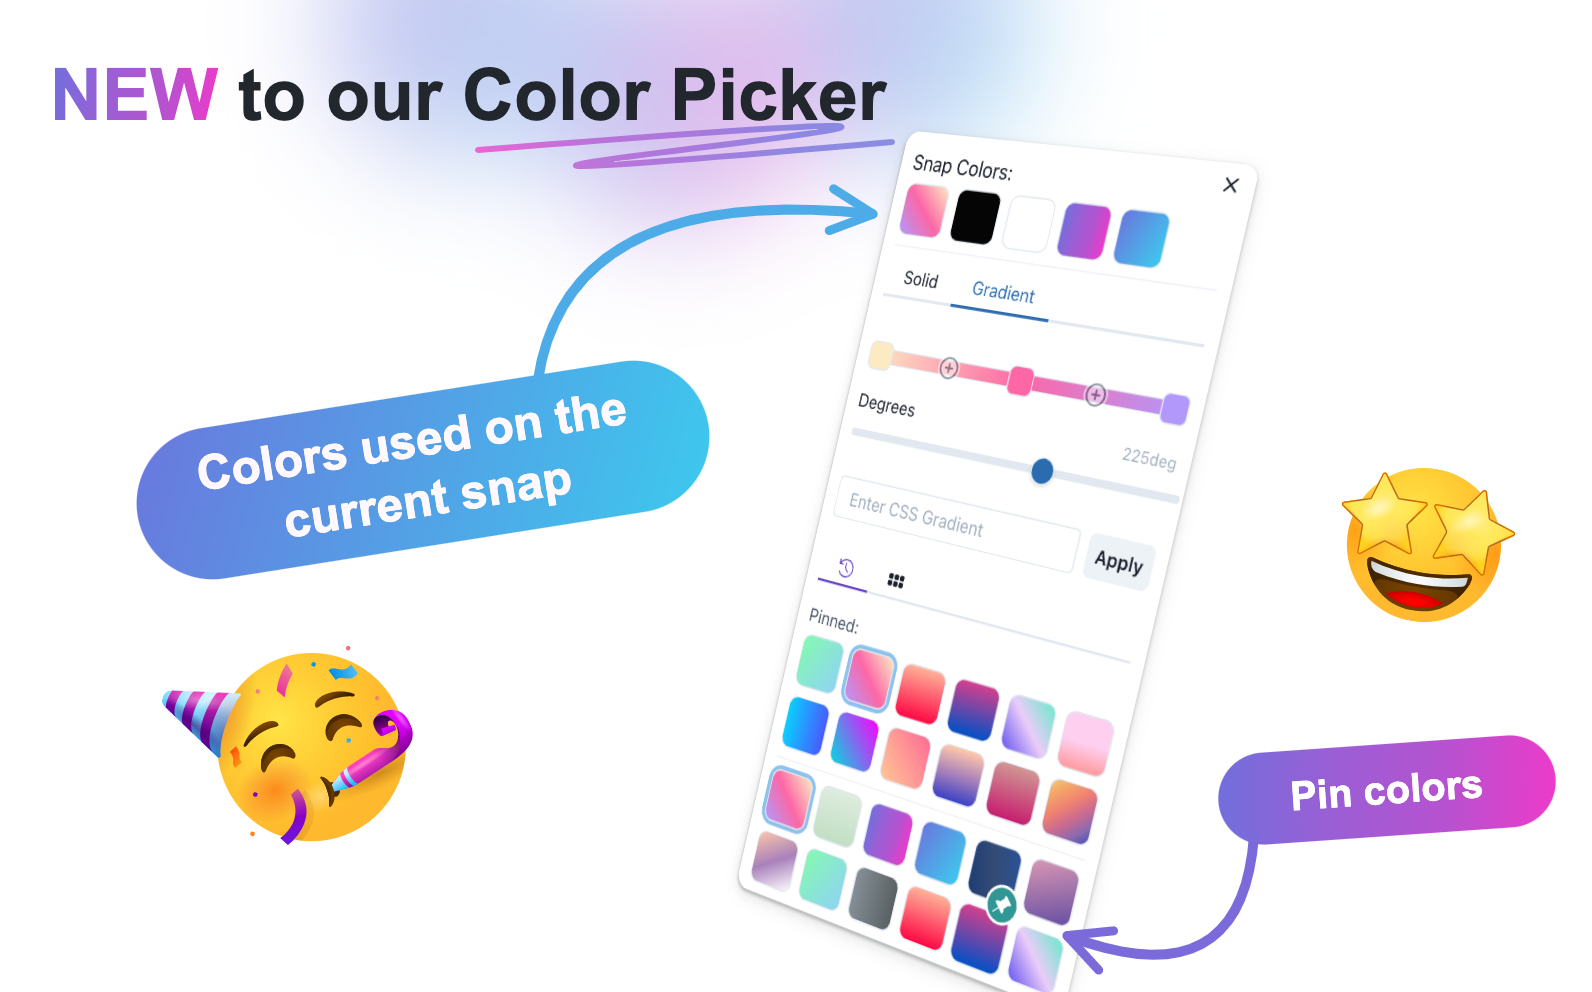 Promotion Image showing the color picker improvements